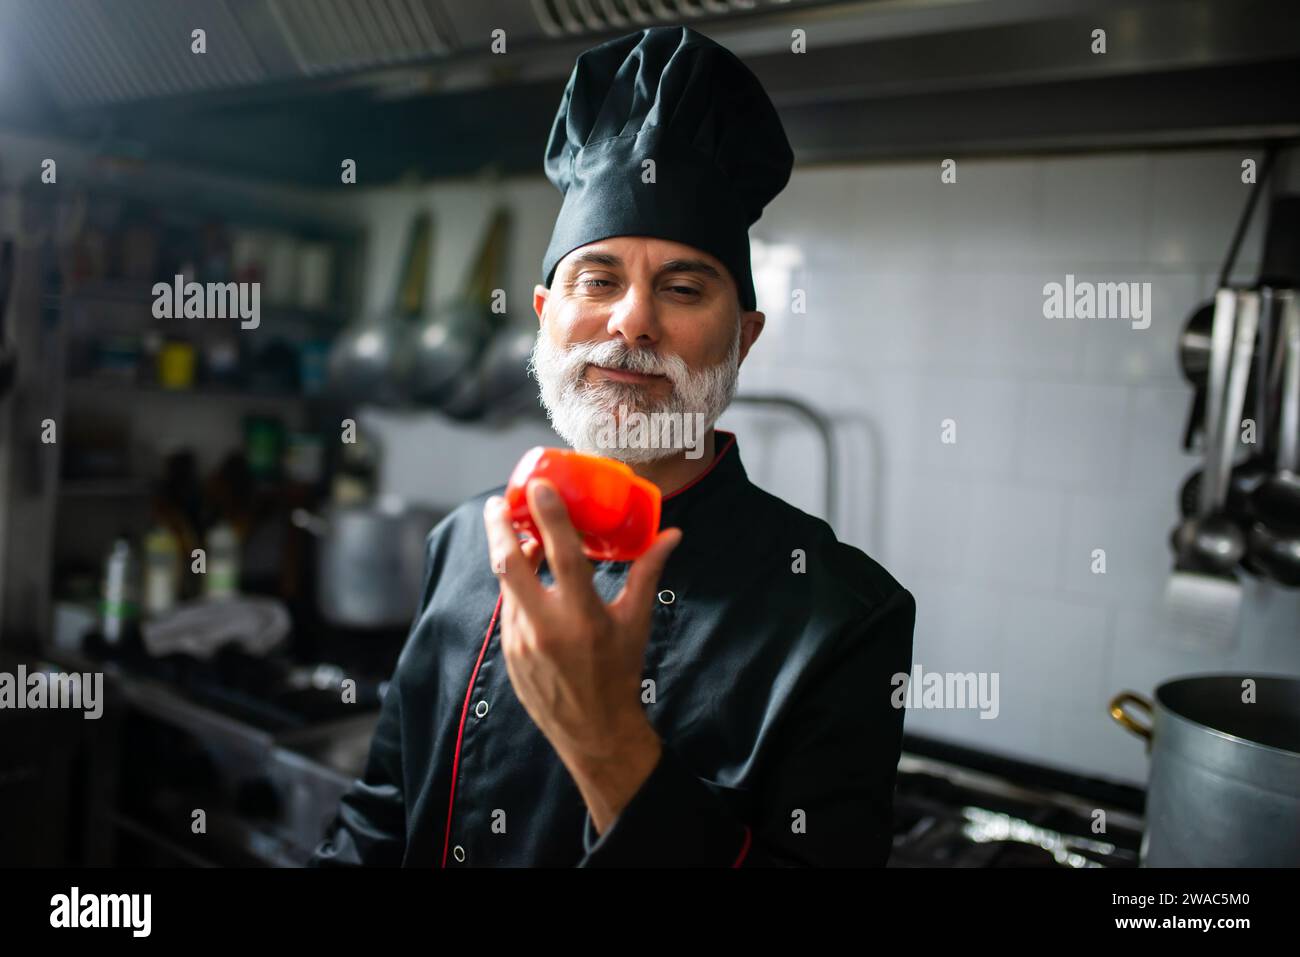 Smiling professional chef in uniform showcasing fresh bell pepper in a commercial kitchen Stock Photo